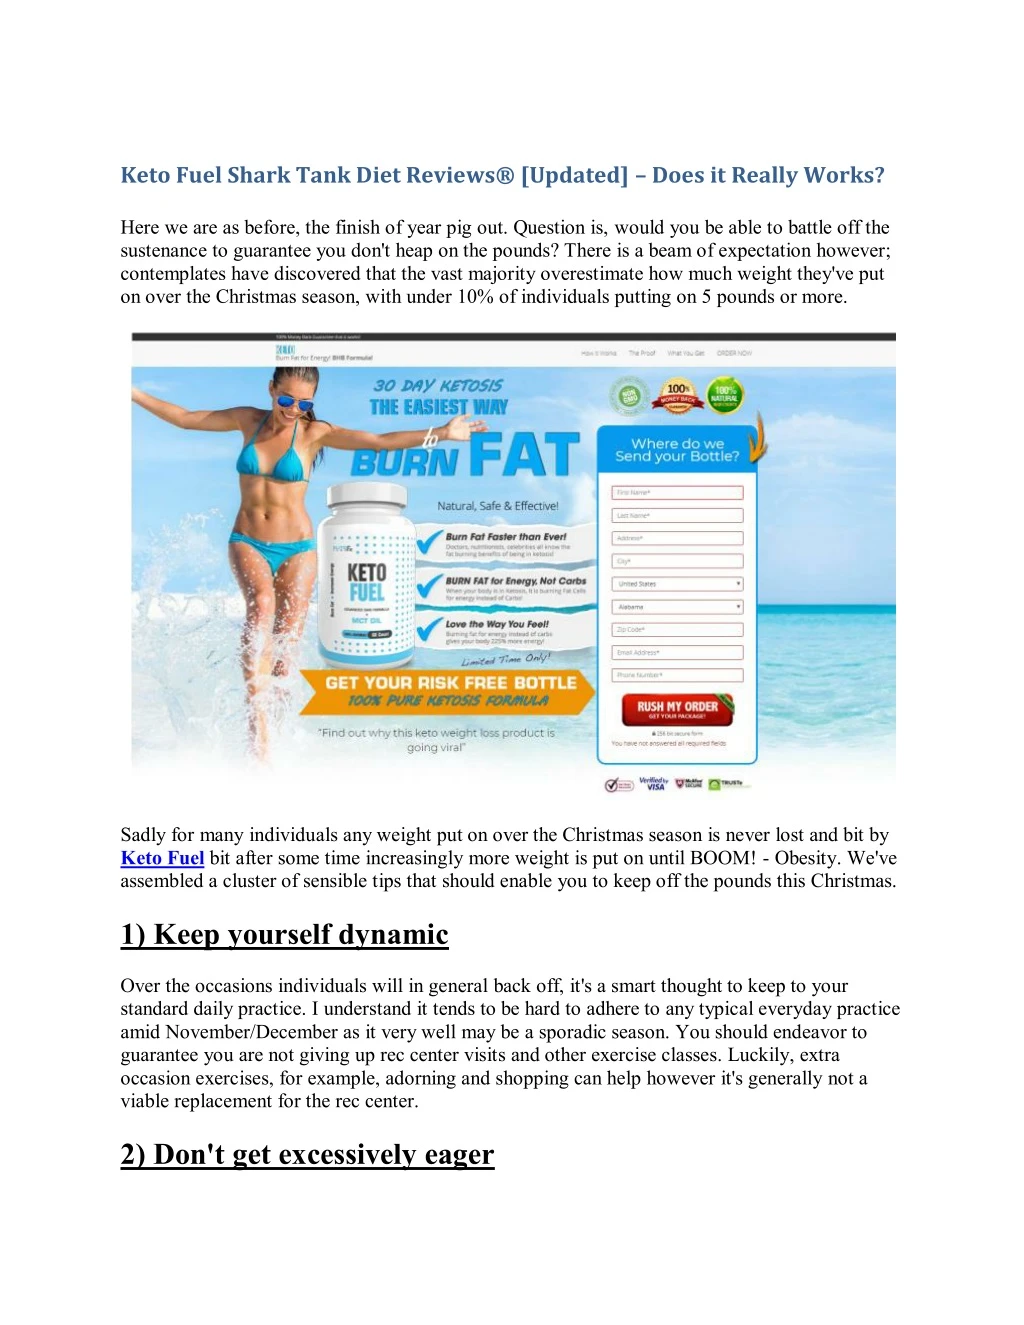 keto fuel shark tank diet reviews updated does